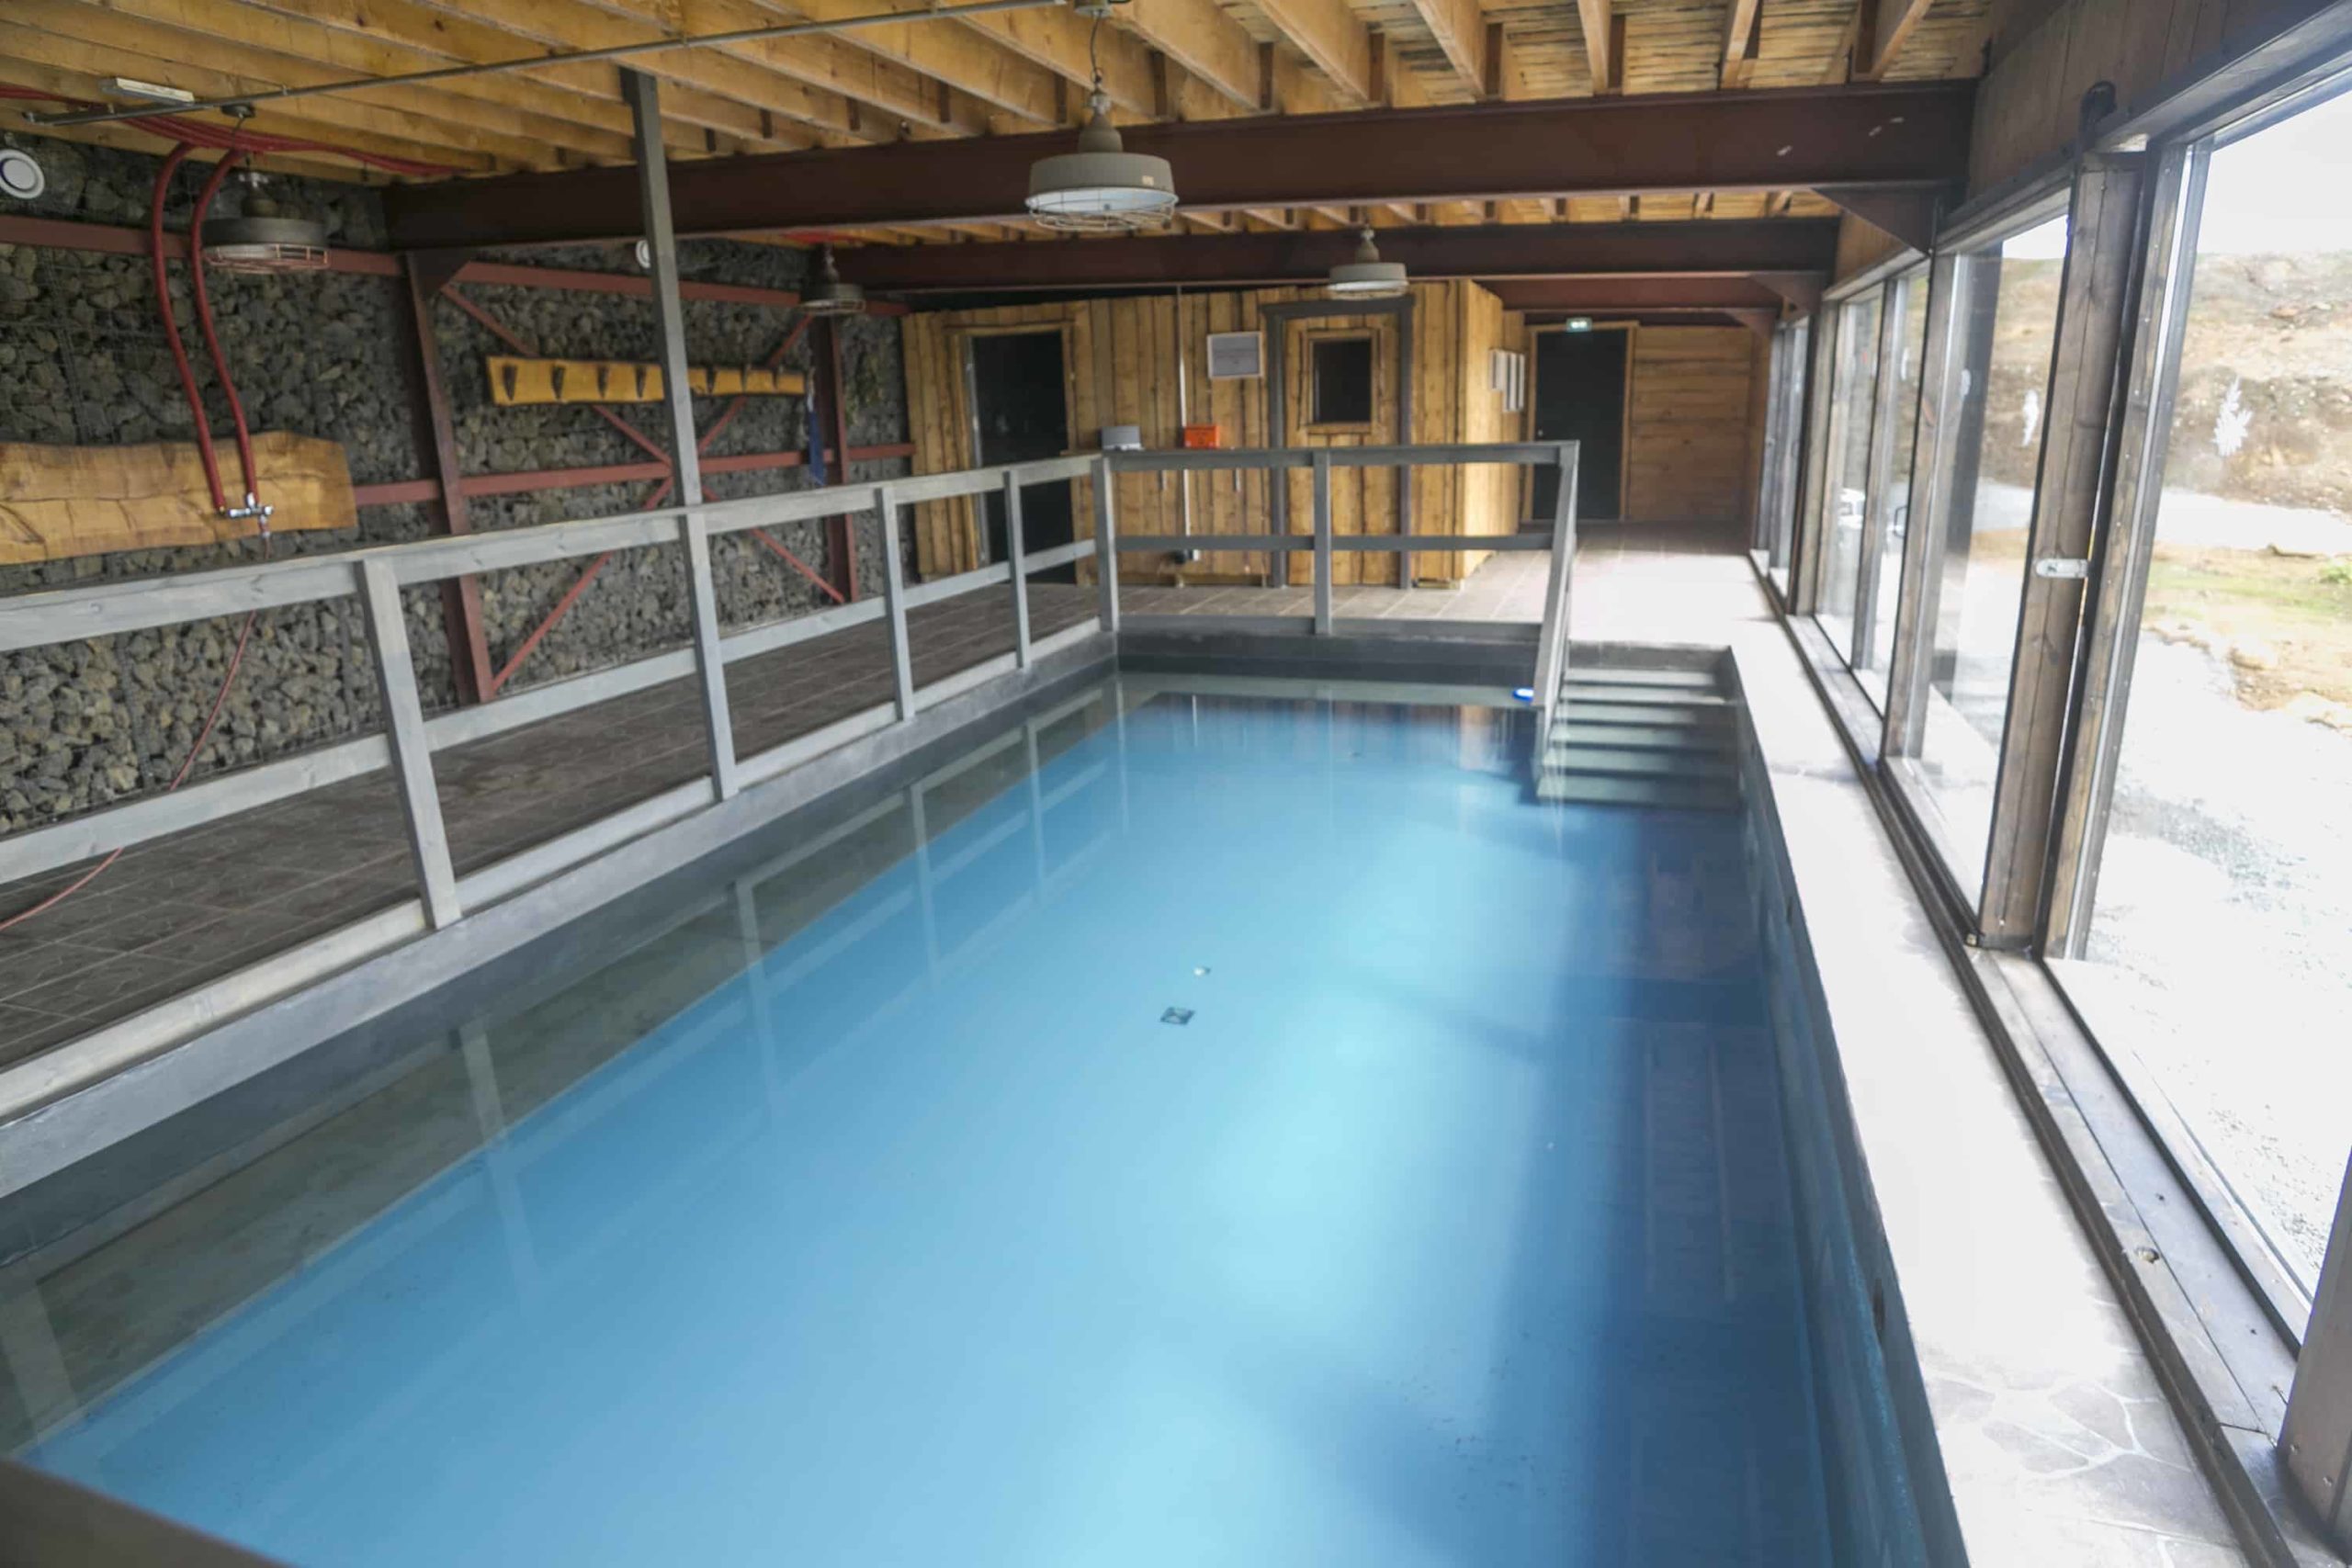 An indoor swimming pool within a rustic setting, featuring exposed wooden beams and stone walls. The pool is calm, reflecting the wood-paneled ceiling, and is flanked by a metal railing. Large windows allow natural light to enter, and a wooden sauna box is visible at the far end of the room